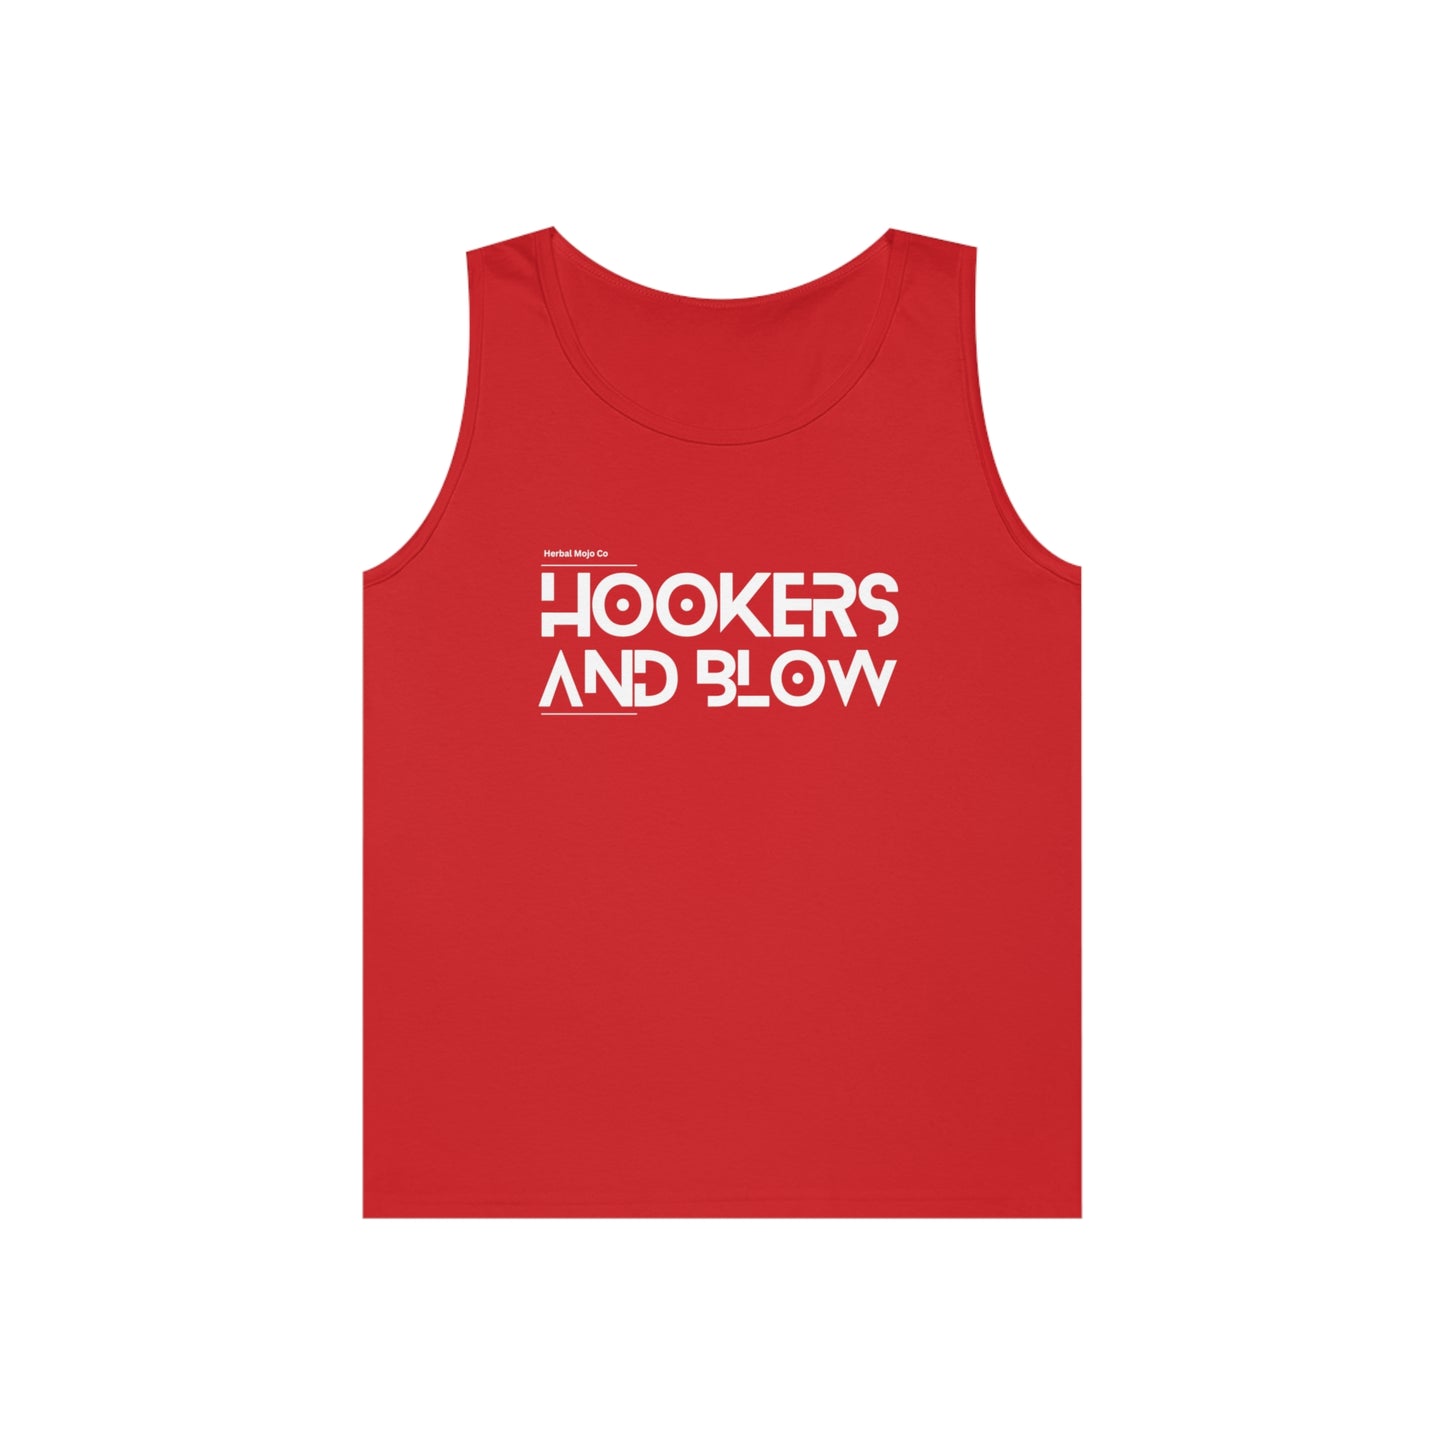 The Stamina for Men Hookers & Blow unisex Red cotton tank top product shot with white background